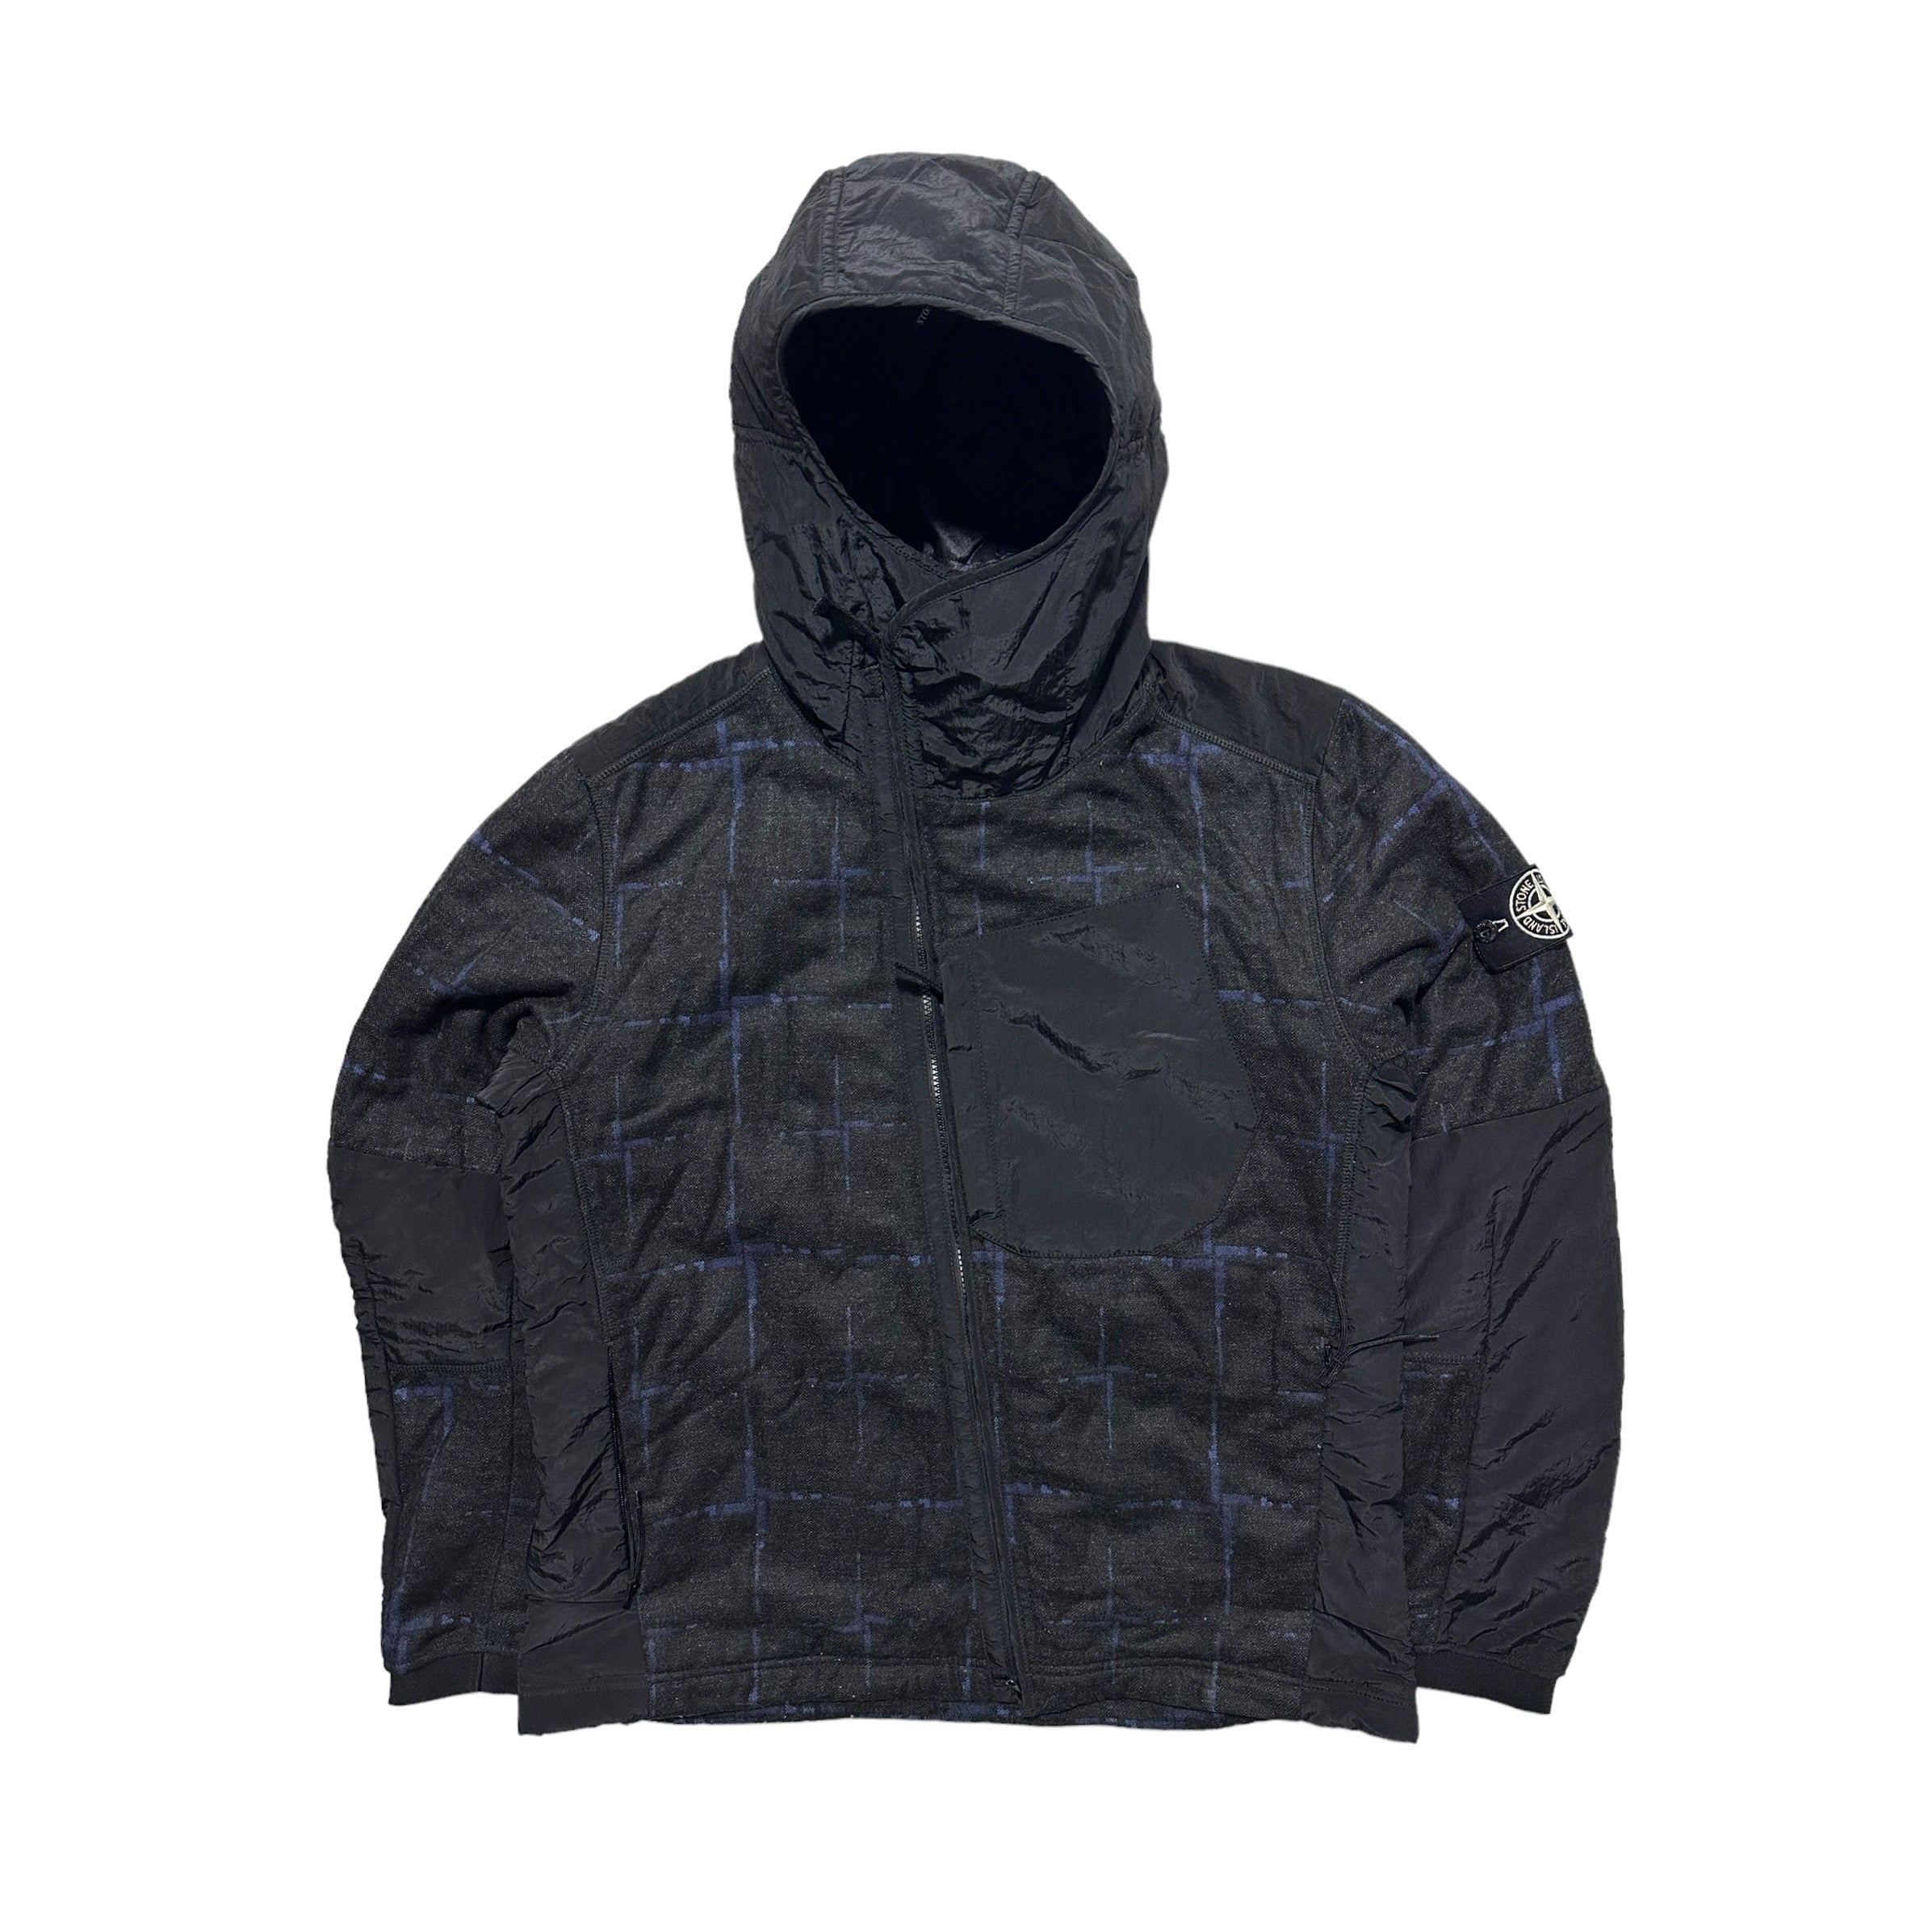 Stone Island Dormeuil House Check Primaloft Jacket with Special Process Badge